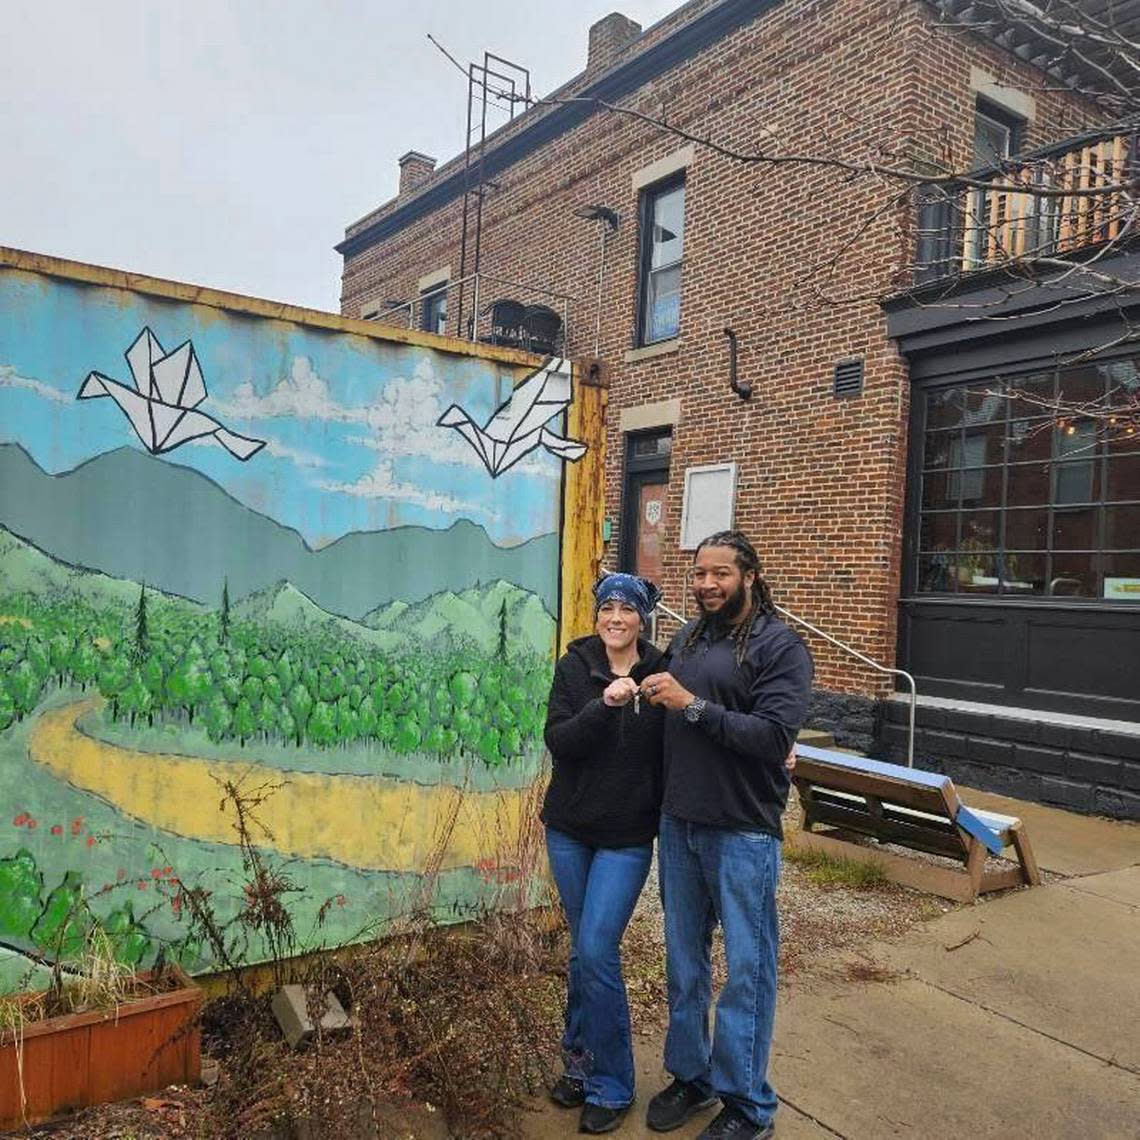 Michael and Antoine Harris are bringing their Moody Mike’s vegan menu to the former Broomwagon cafe space on North Limestone. They hope to open the new cafe in March. Provided